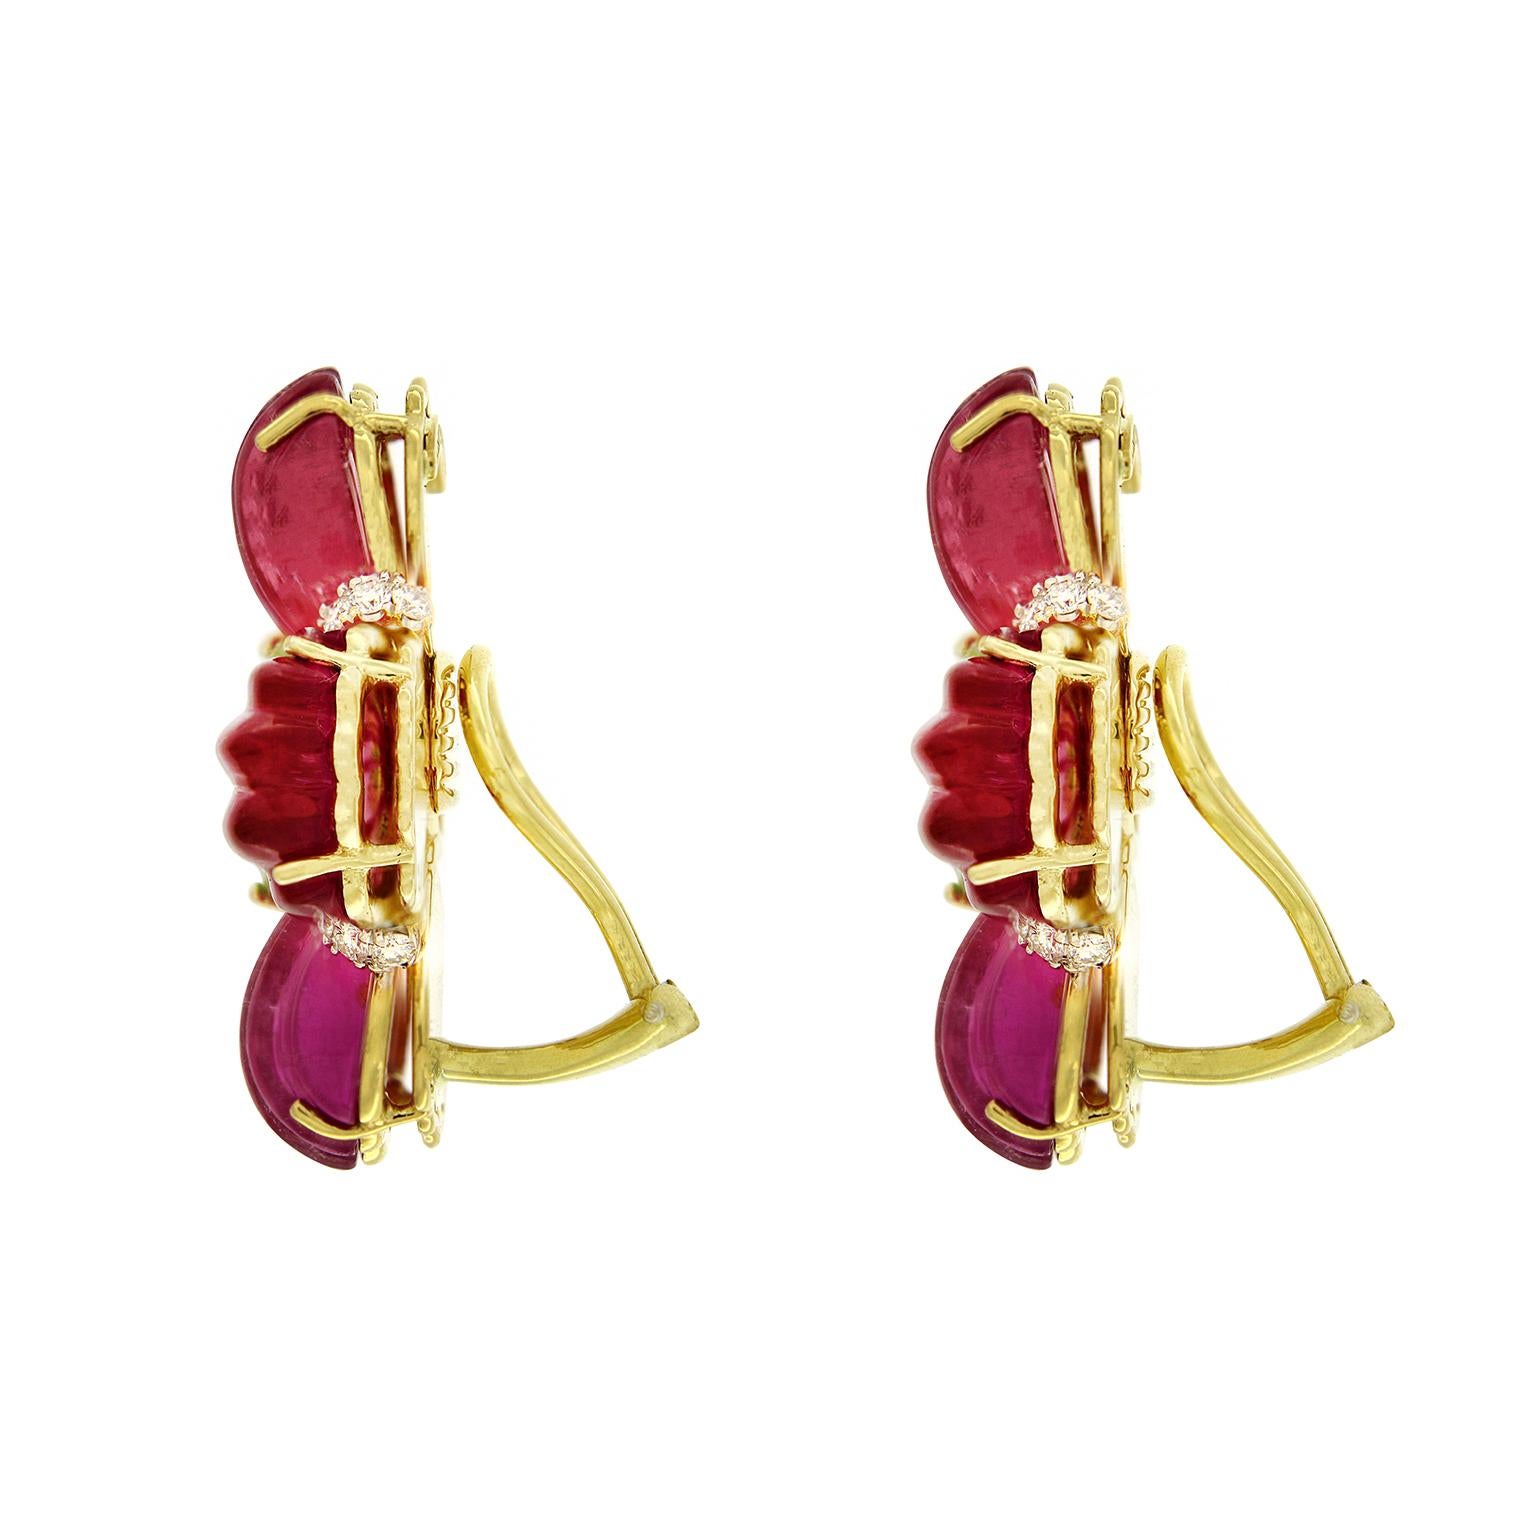 Valentin Magro Hand Carved Rubellite and Trillian Peridot Earrings are set in 18k yellow gold. The rubellite is carved into fluted fan shapes. They flank faceted peridot, their hue and form contrasting with one another. Round brilliant cut diamond